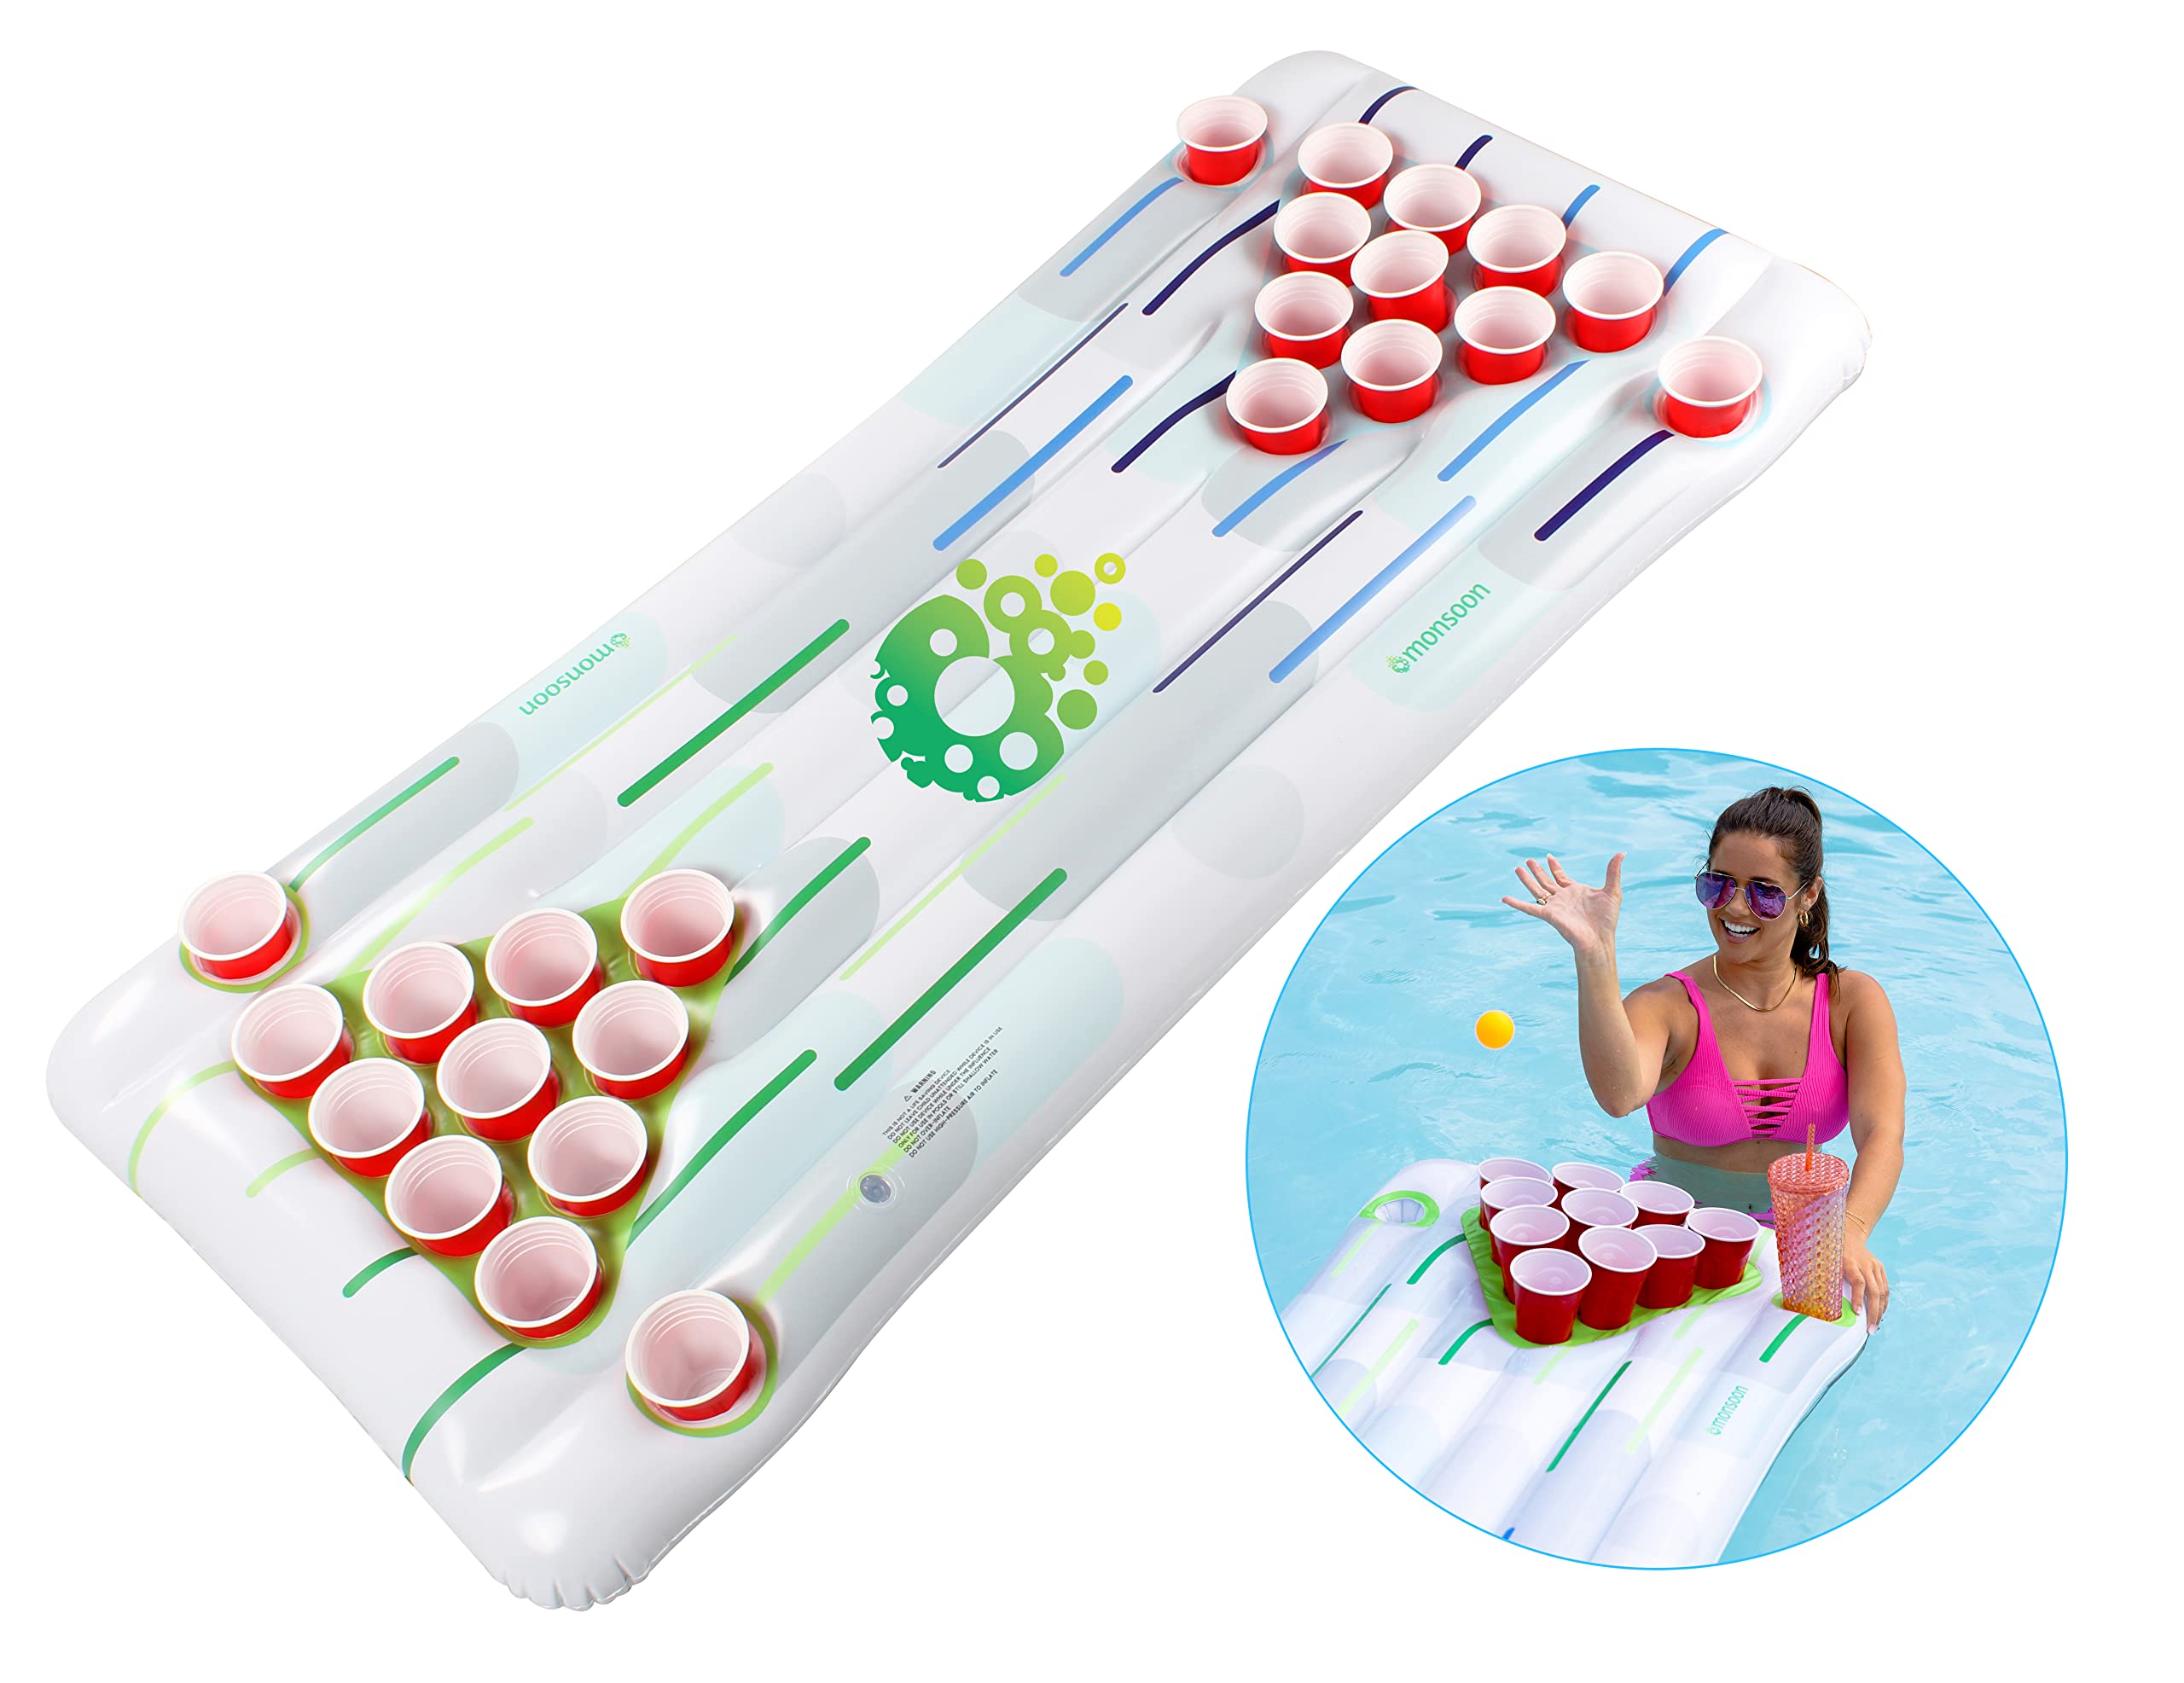 72" x 27" Monsoon Inflatable Floating Beer Pong Table Pool Party Game $10 + Free Shipping w/ Prime or on $25+